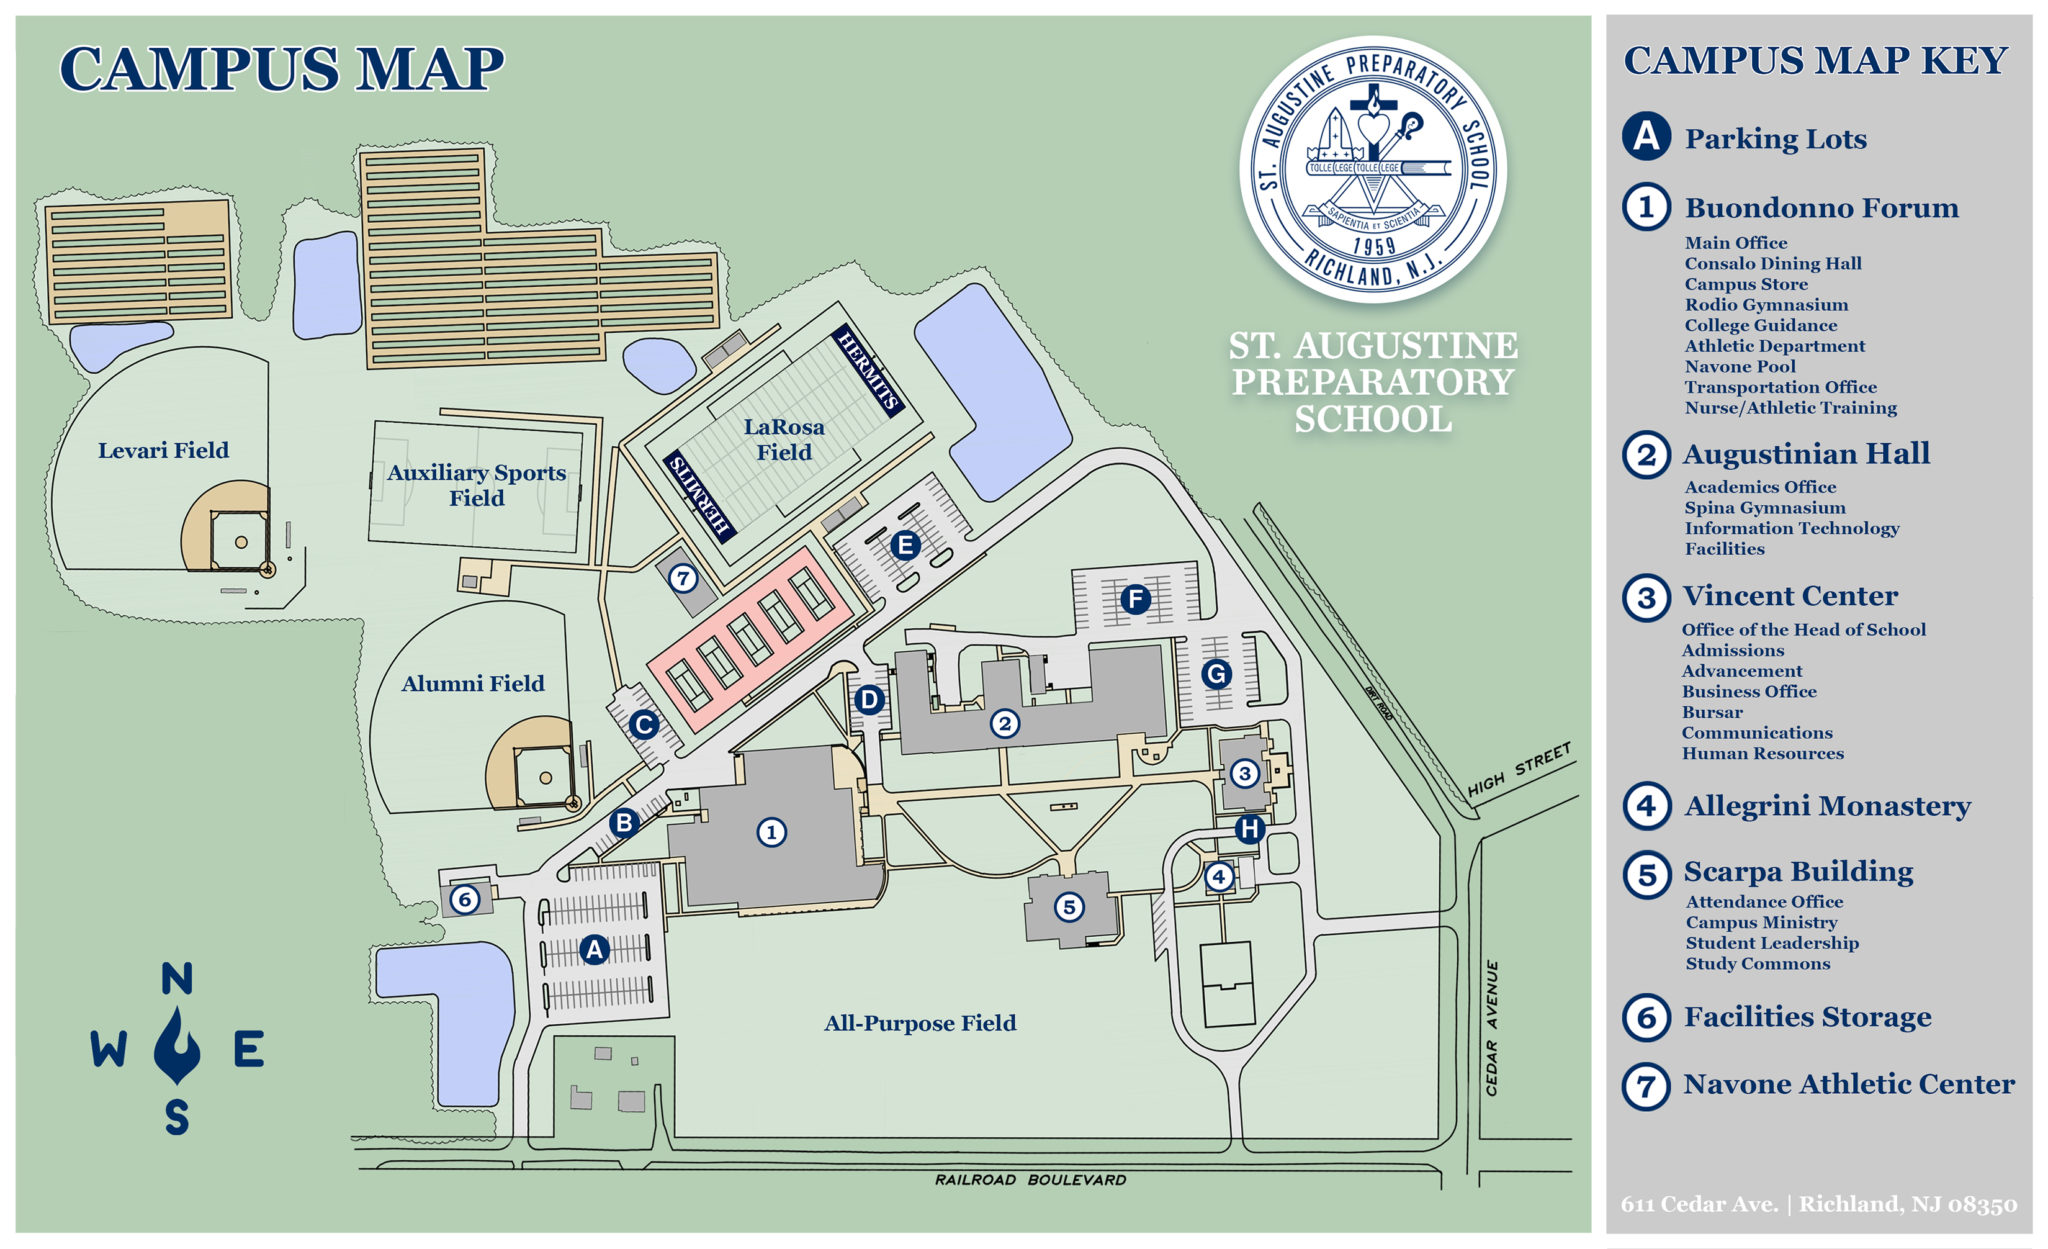 For a printable campus map, please click the image below! 